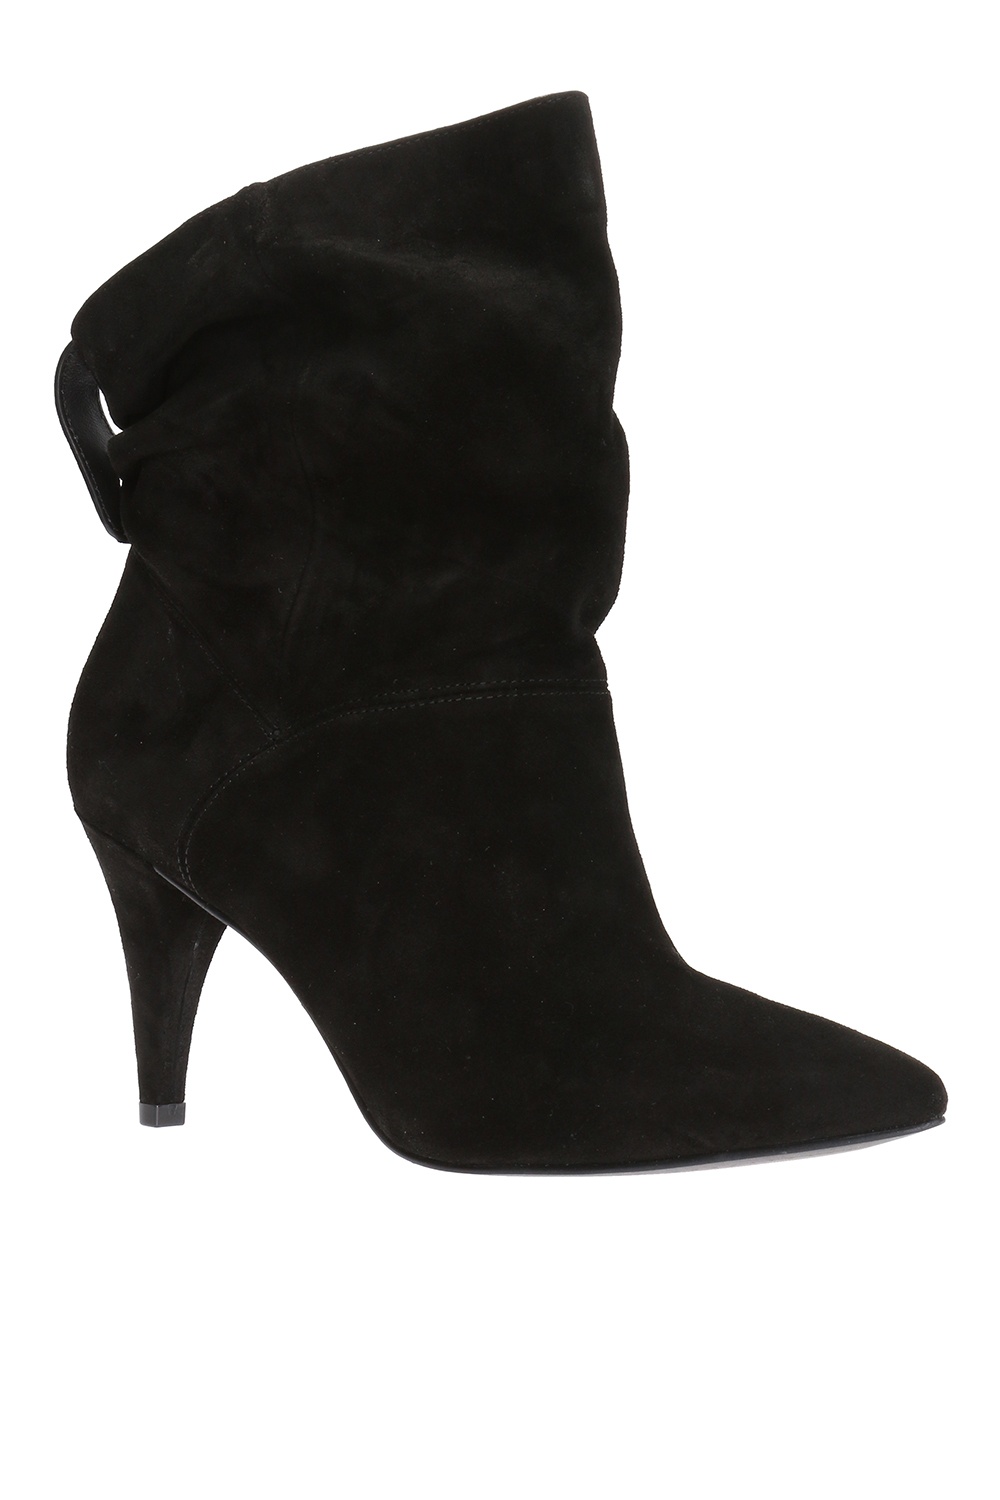 michael kors carey suede ankle boot